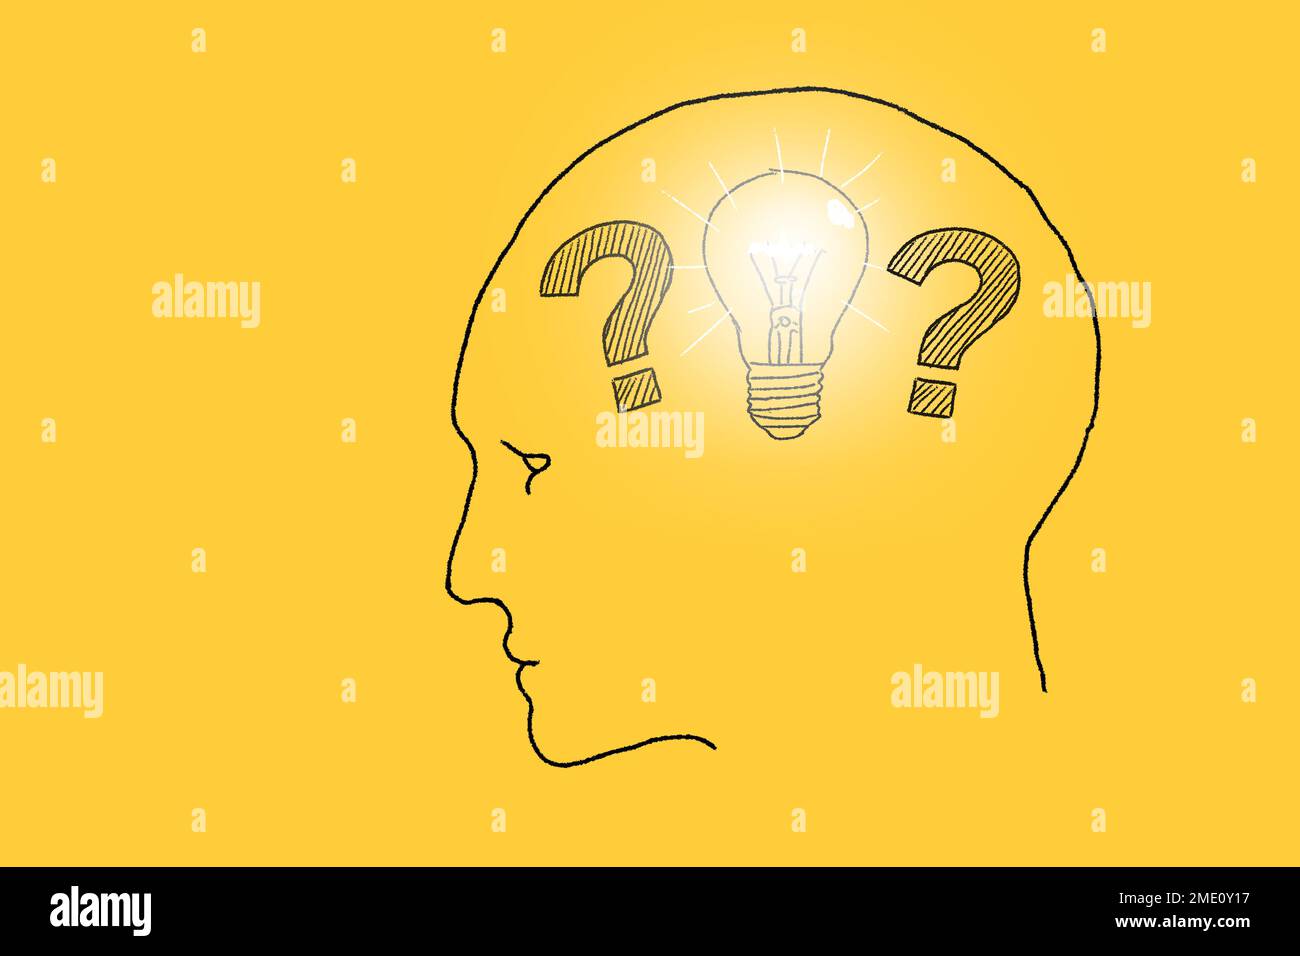 The question marks inside of the human head and light bulbs. Hand drawn illustration on yellow background. Idea concept. Stock Photo